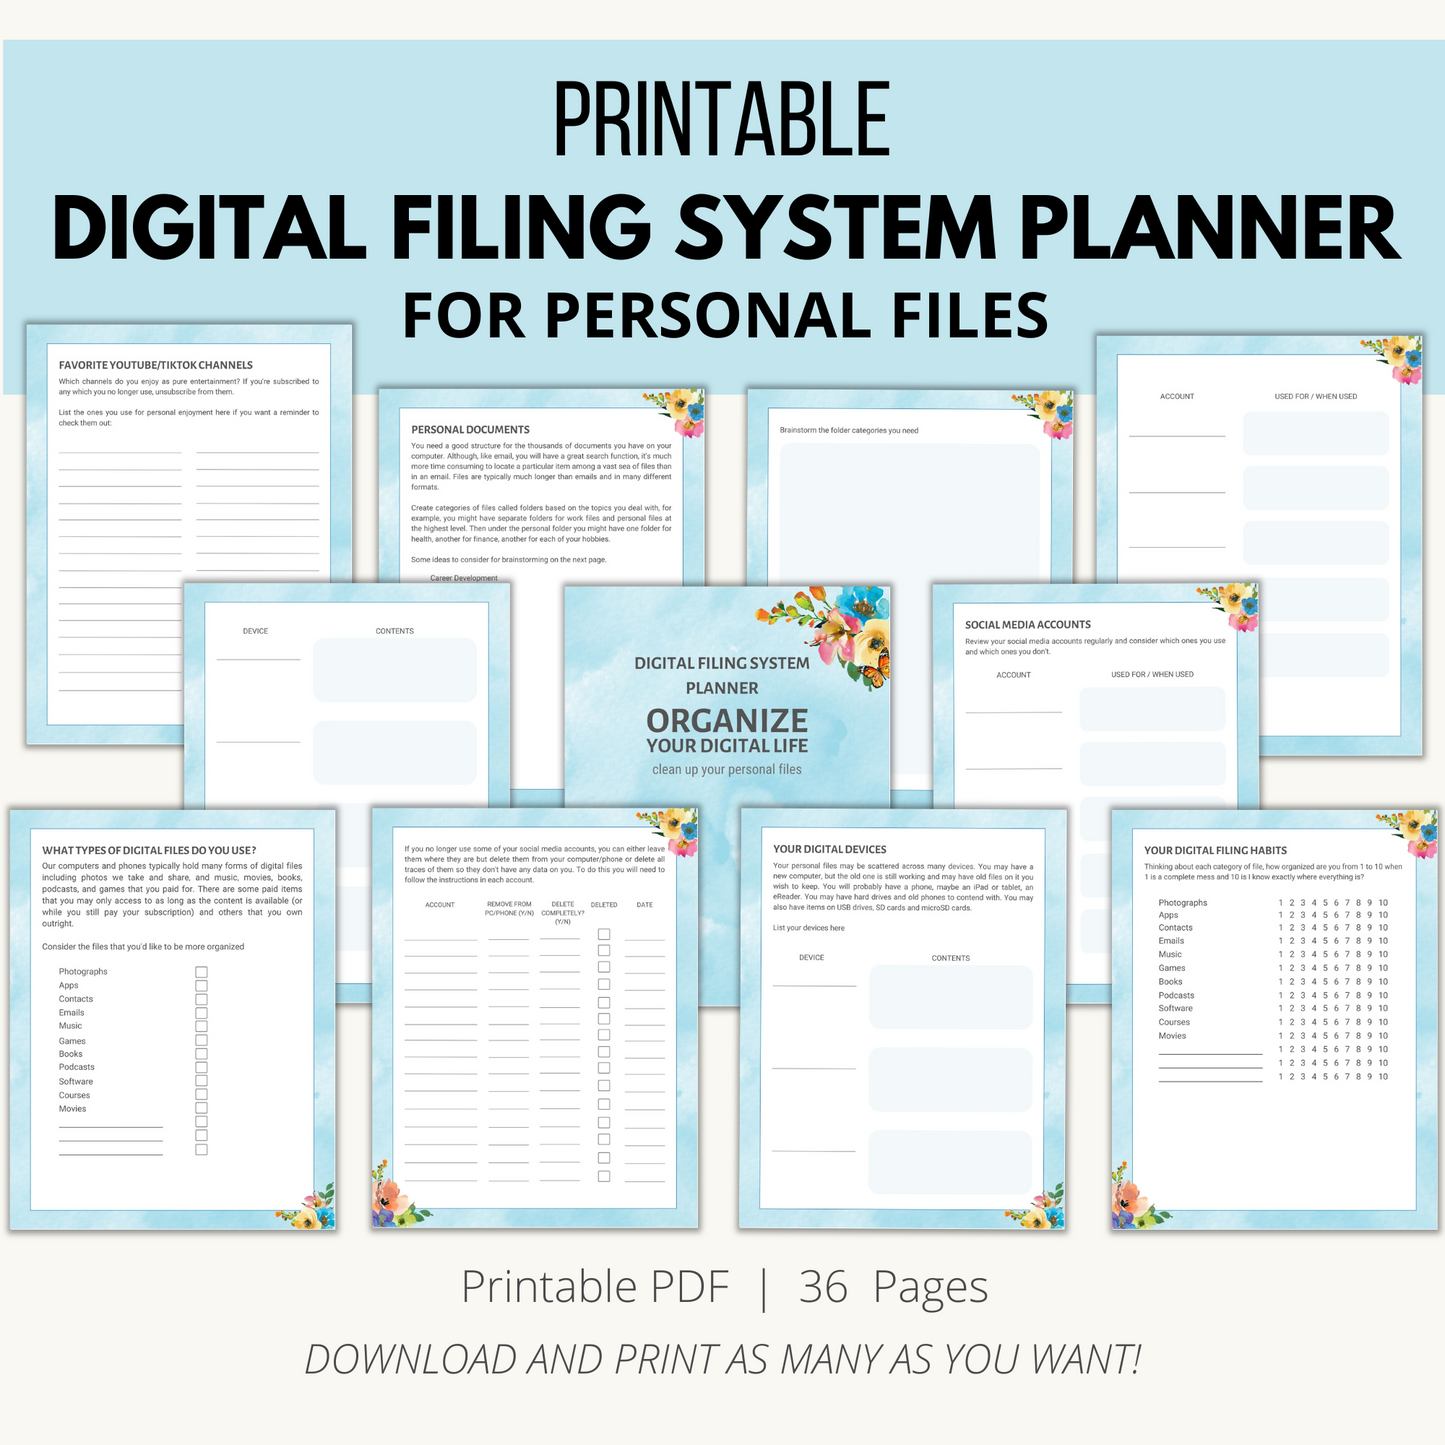 Printable Digital Filing System Planner for Personal Files